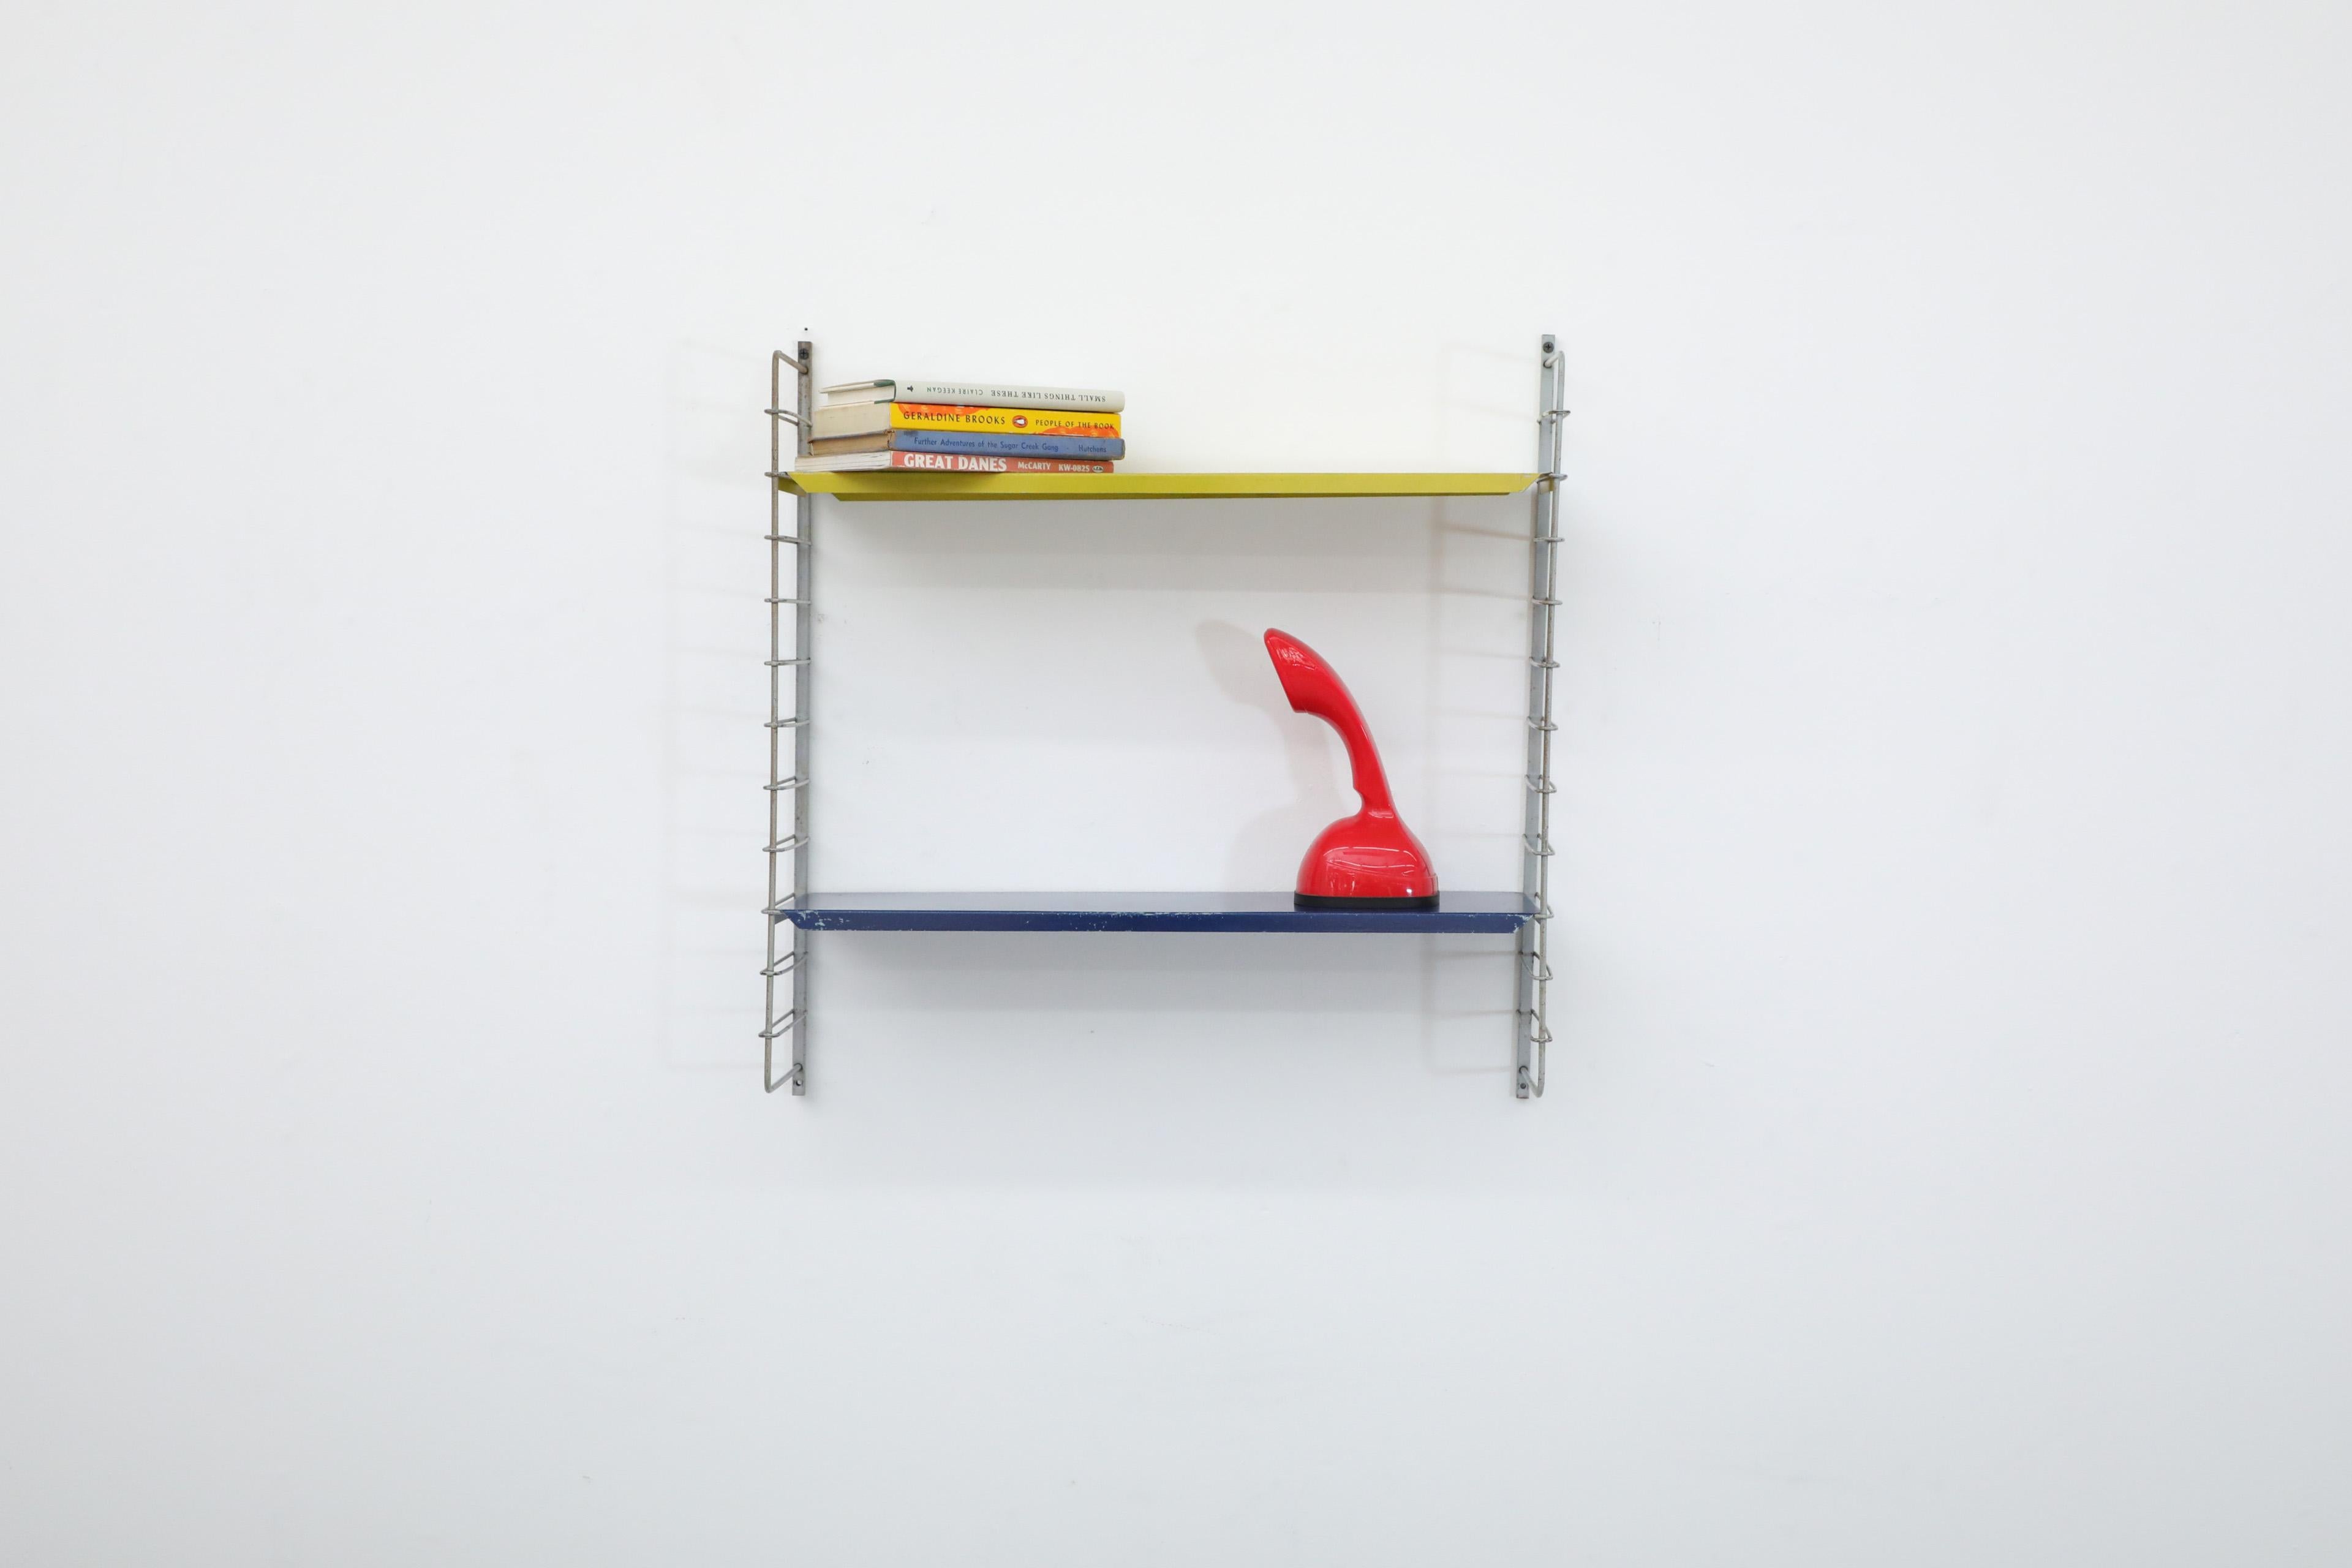 Single section Tomado style wall mounted shelving unit with yellow and blue metal shelves on thin light gray wire risers. In original condition with visible wear consistent with its age and use. Similar shelving units also available and listed